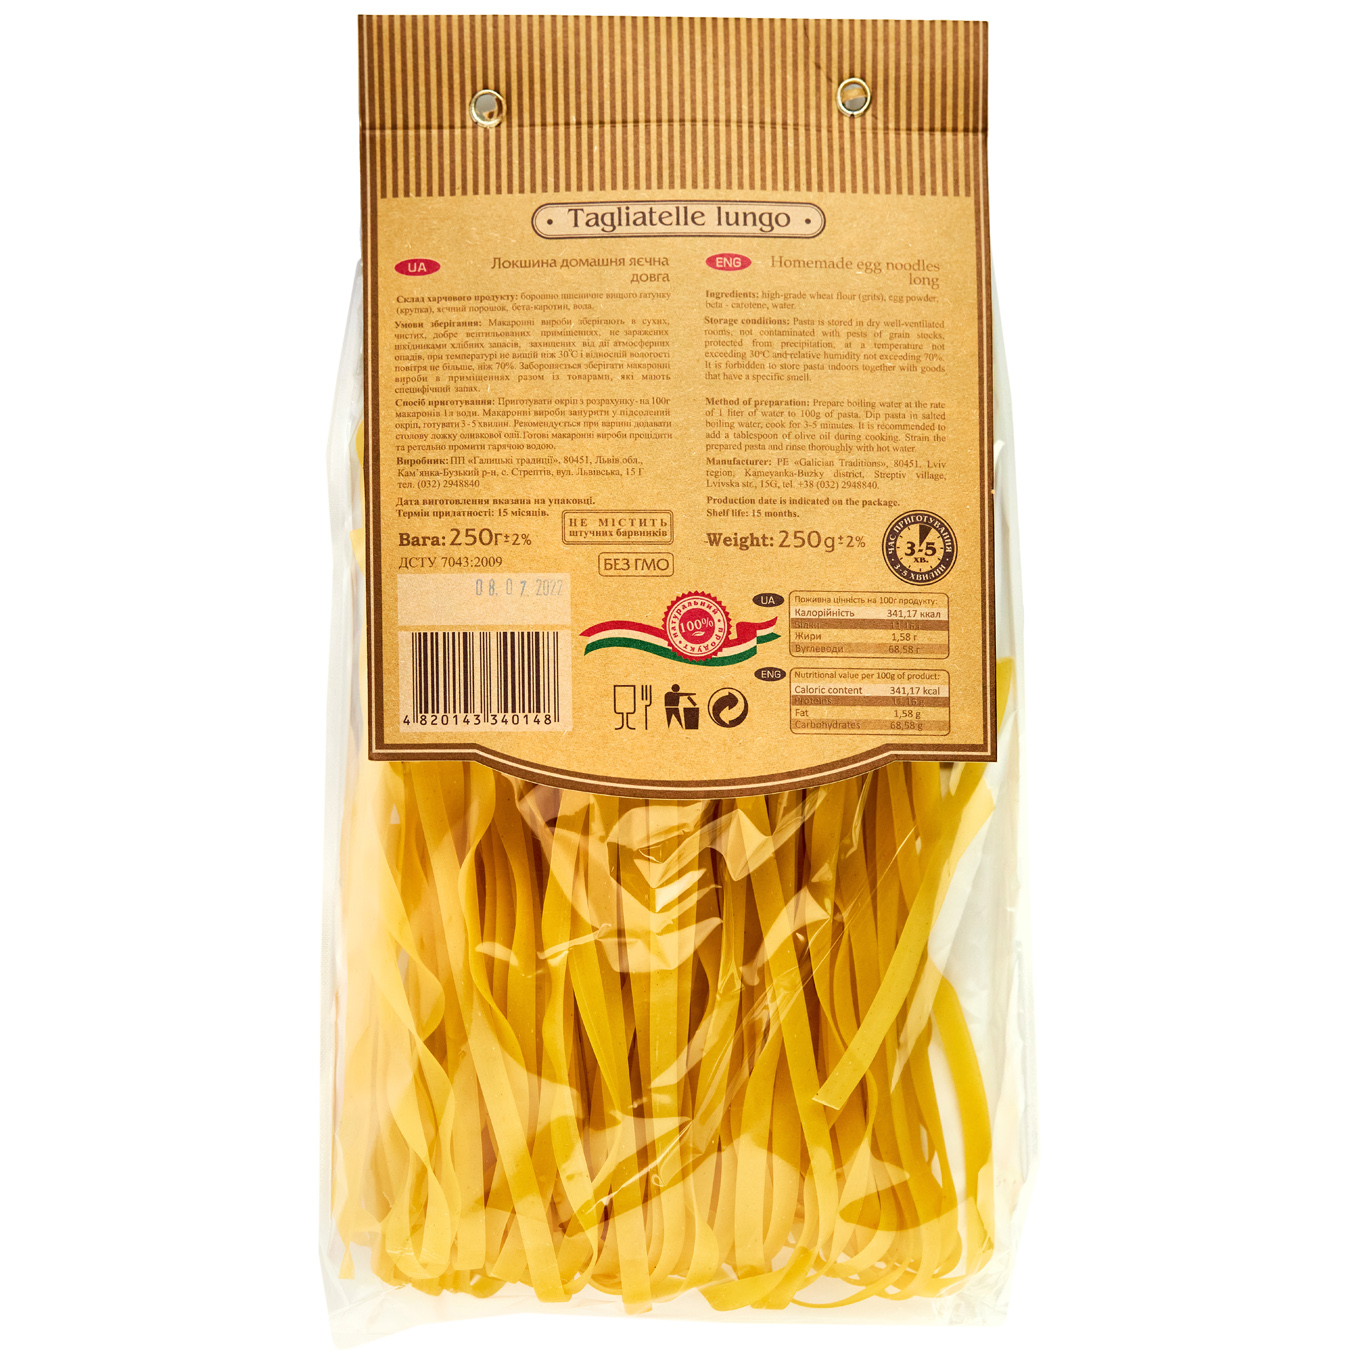 Homemade egg noodles Galician traditions 250g 2